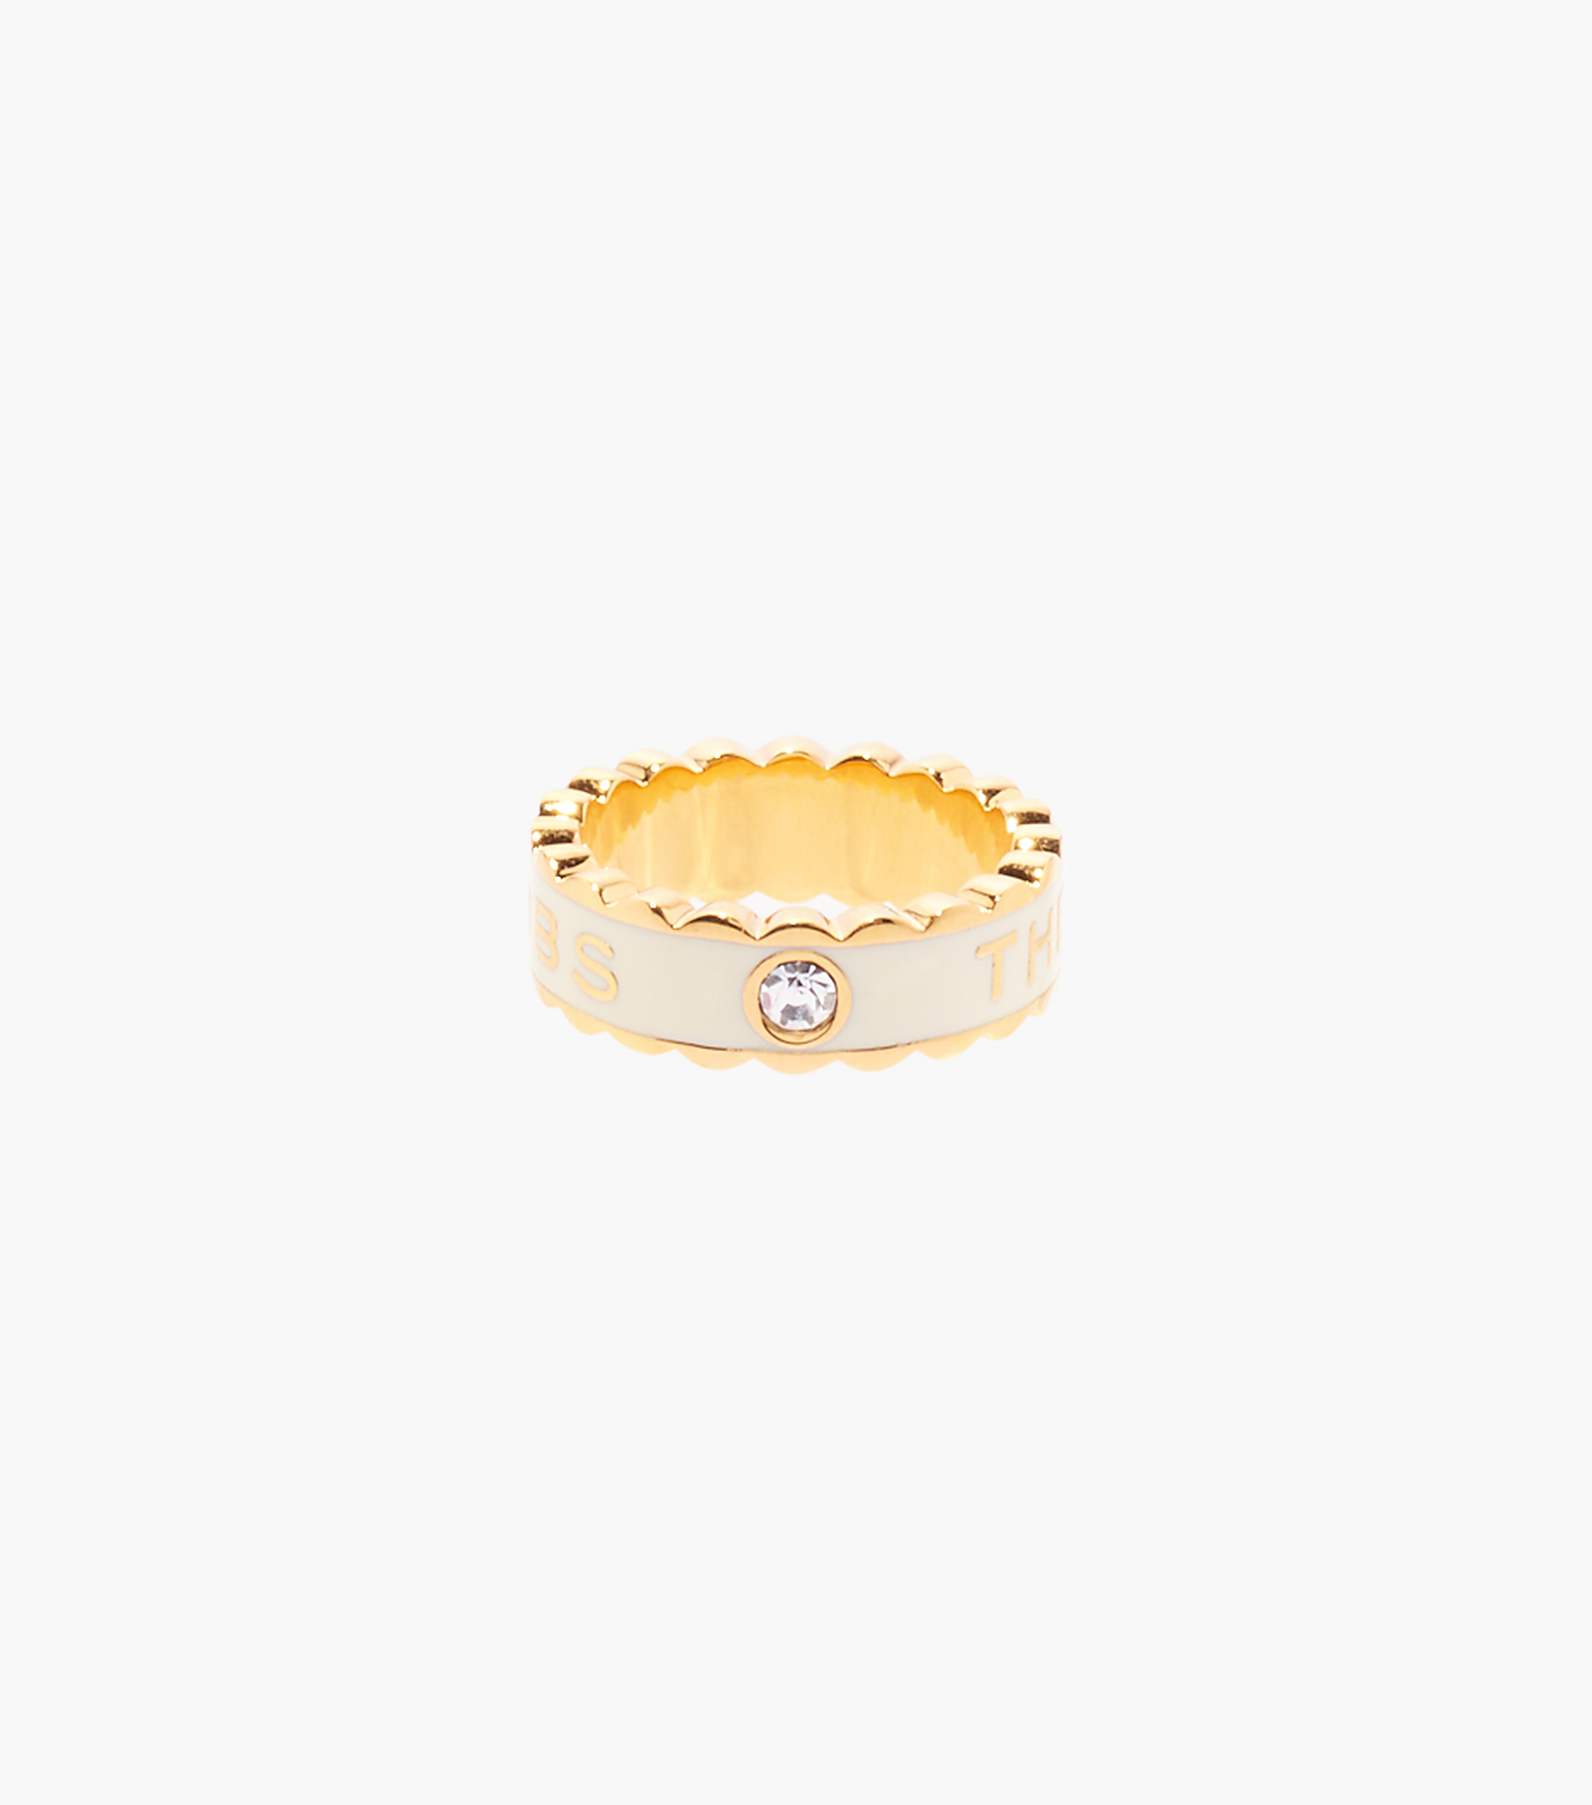 ＊MARC JACOBS ＊The Scallop Medallion リング